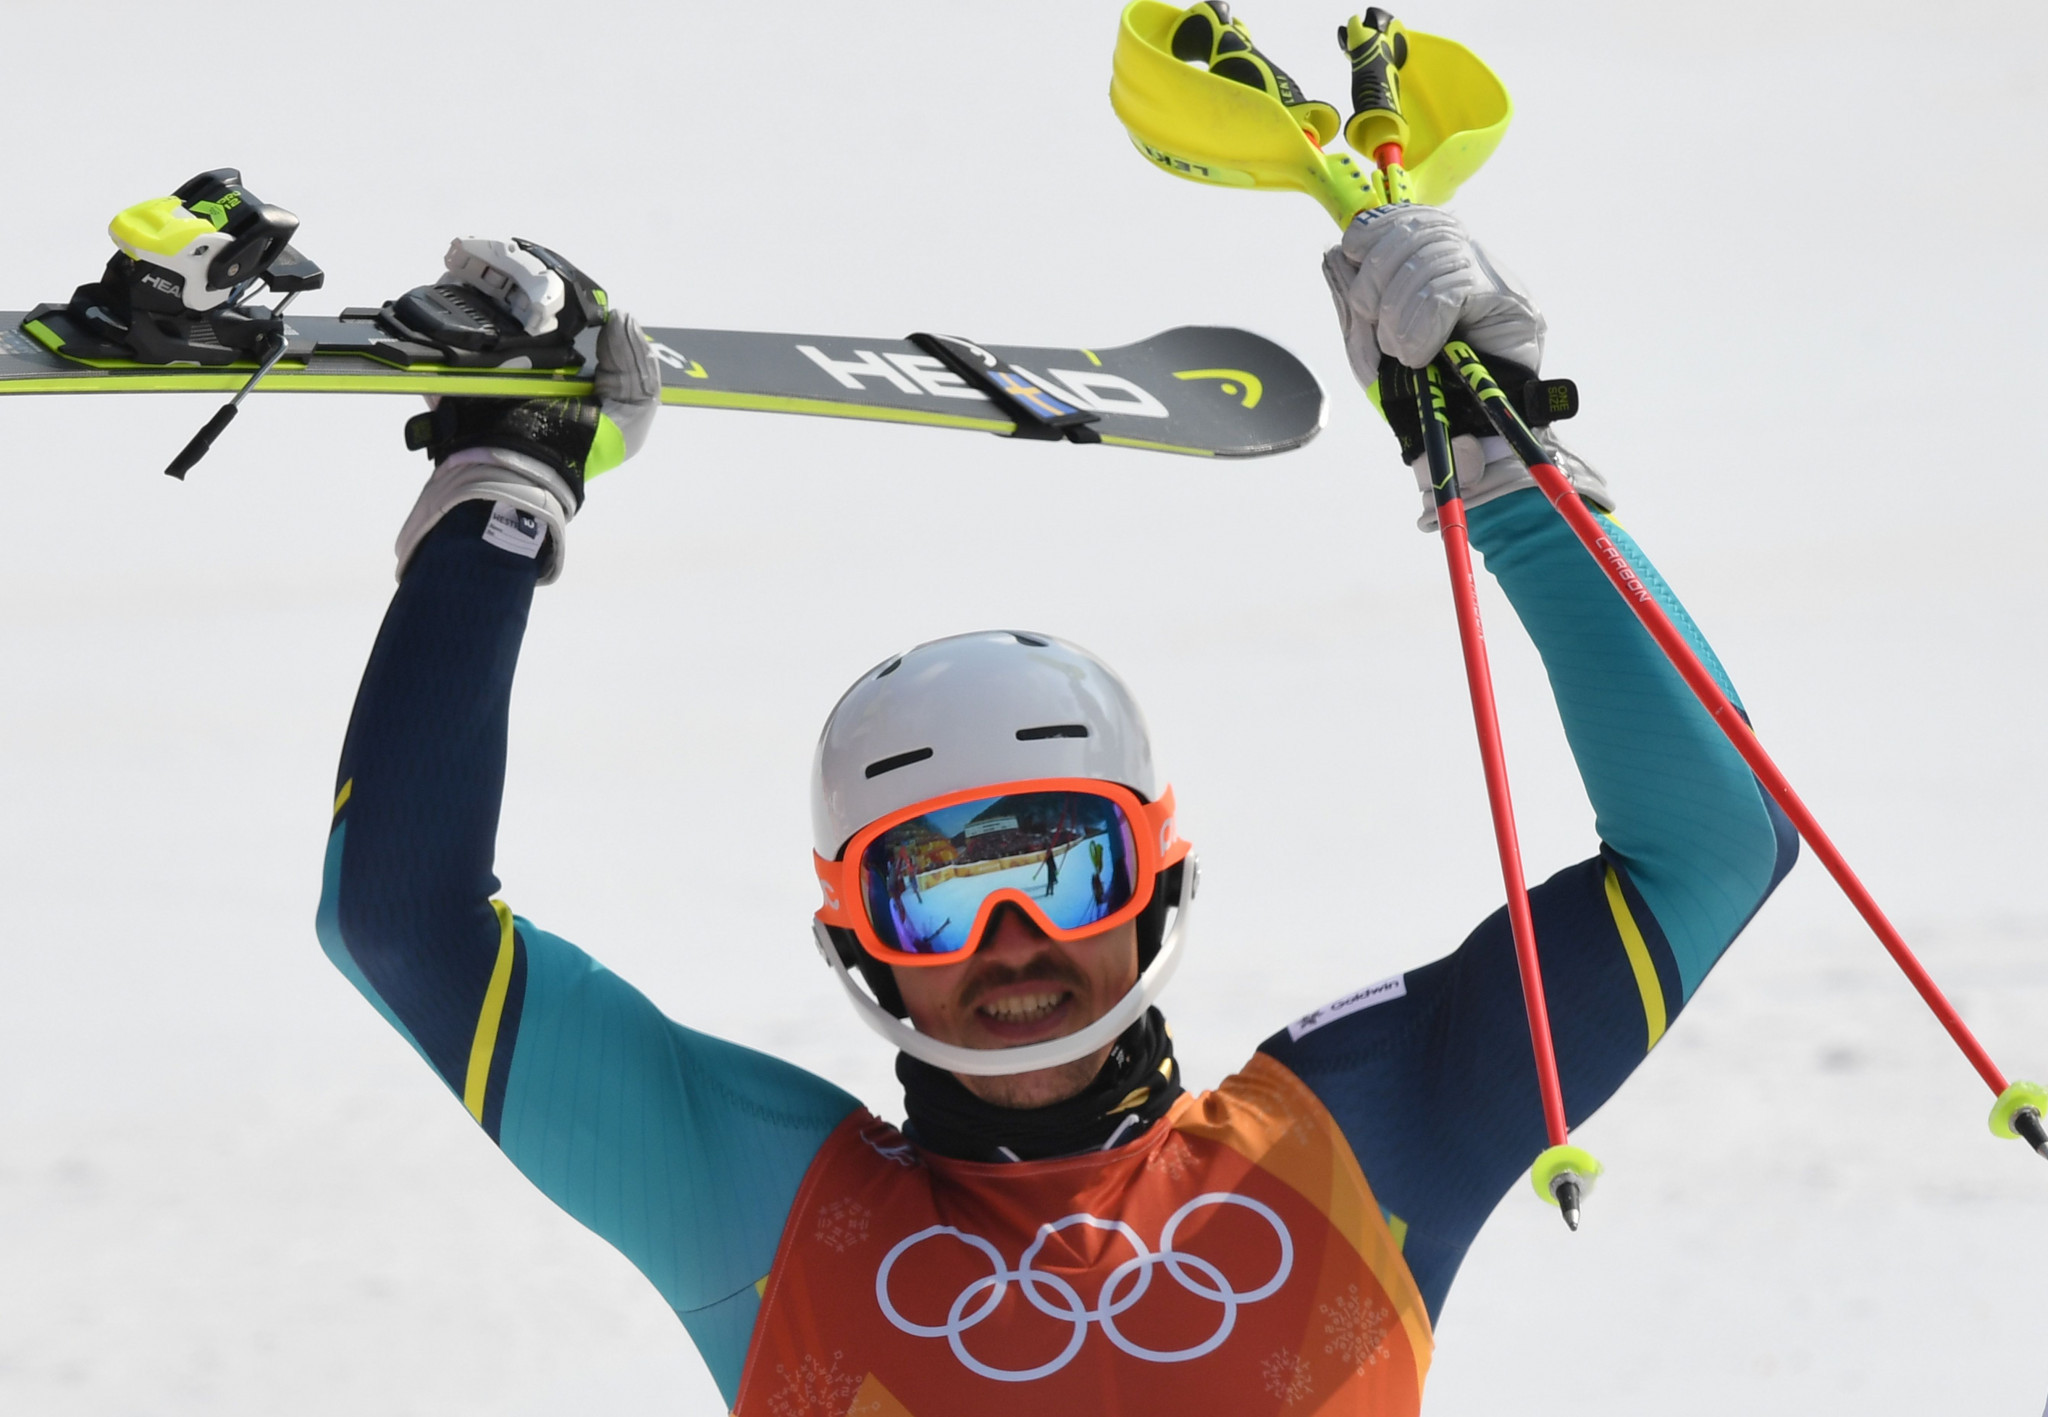 Sweden’s André Myhrer won the men’s slalom Olympic gold medal here today at Pyeongchang 2018 ©Getty Images